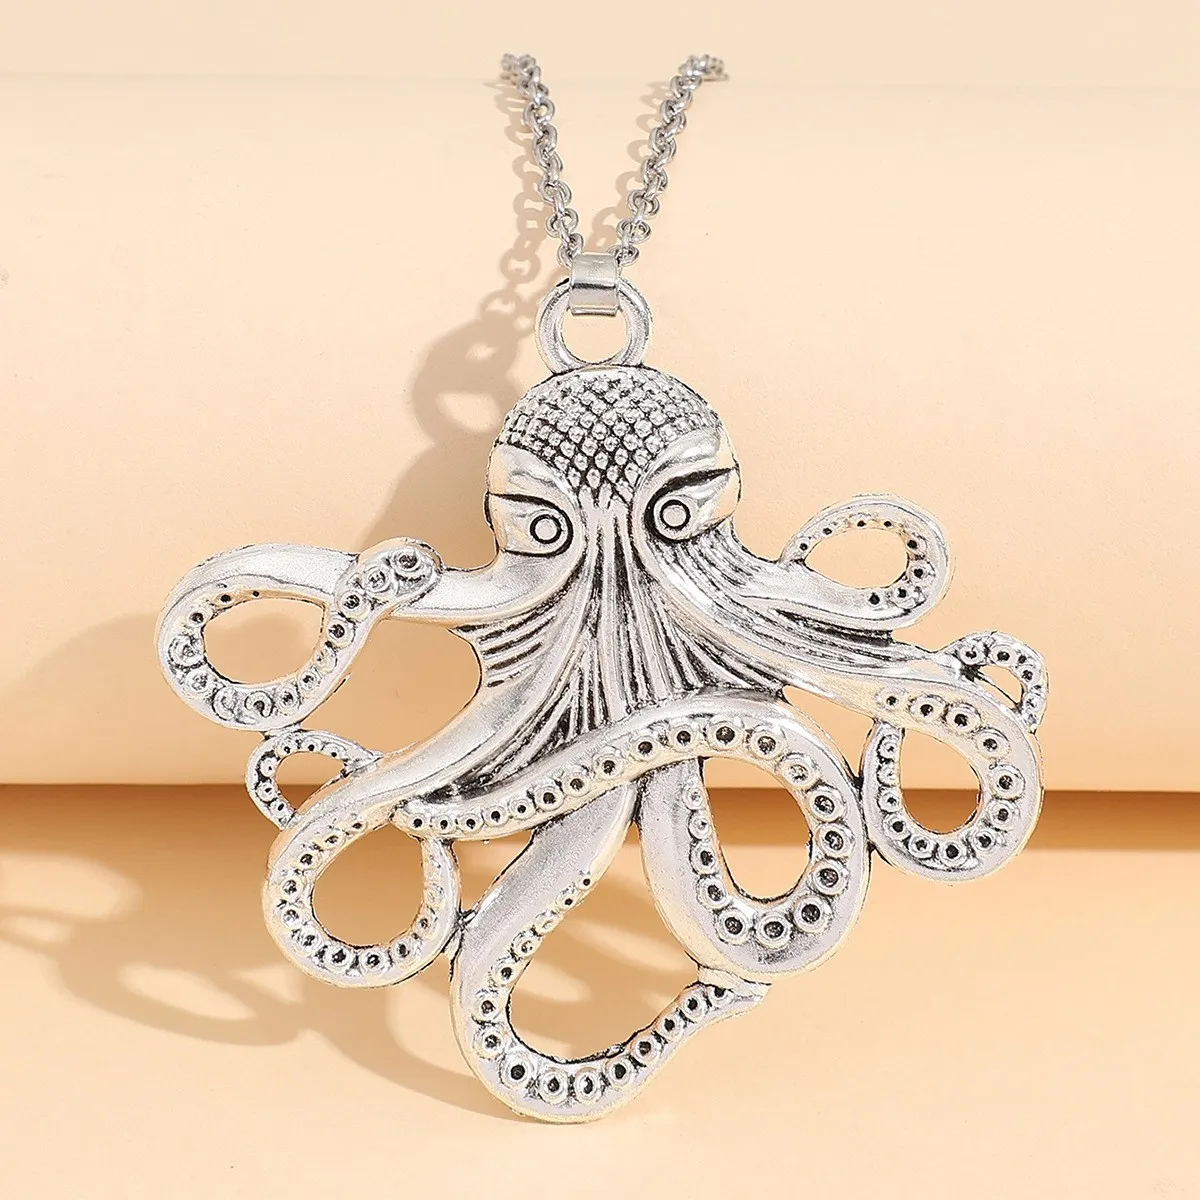 S3742 Fashion Jewelry Silver Color Vintage Octopus Pendant Necklace